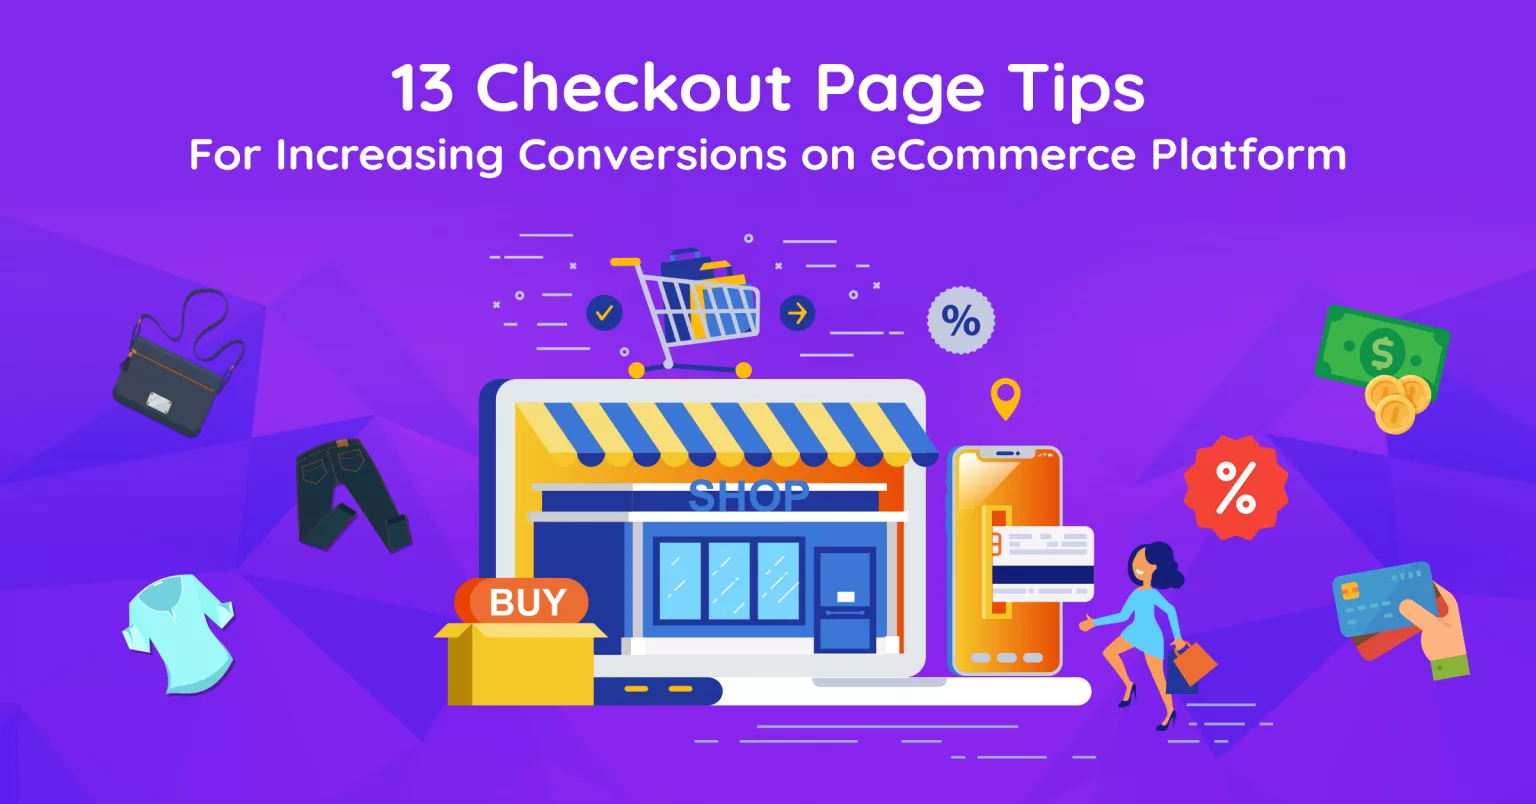 web banner for our blog on 12 checkout page tips for increasing conversions on the Ecommerce platform